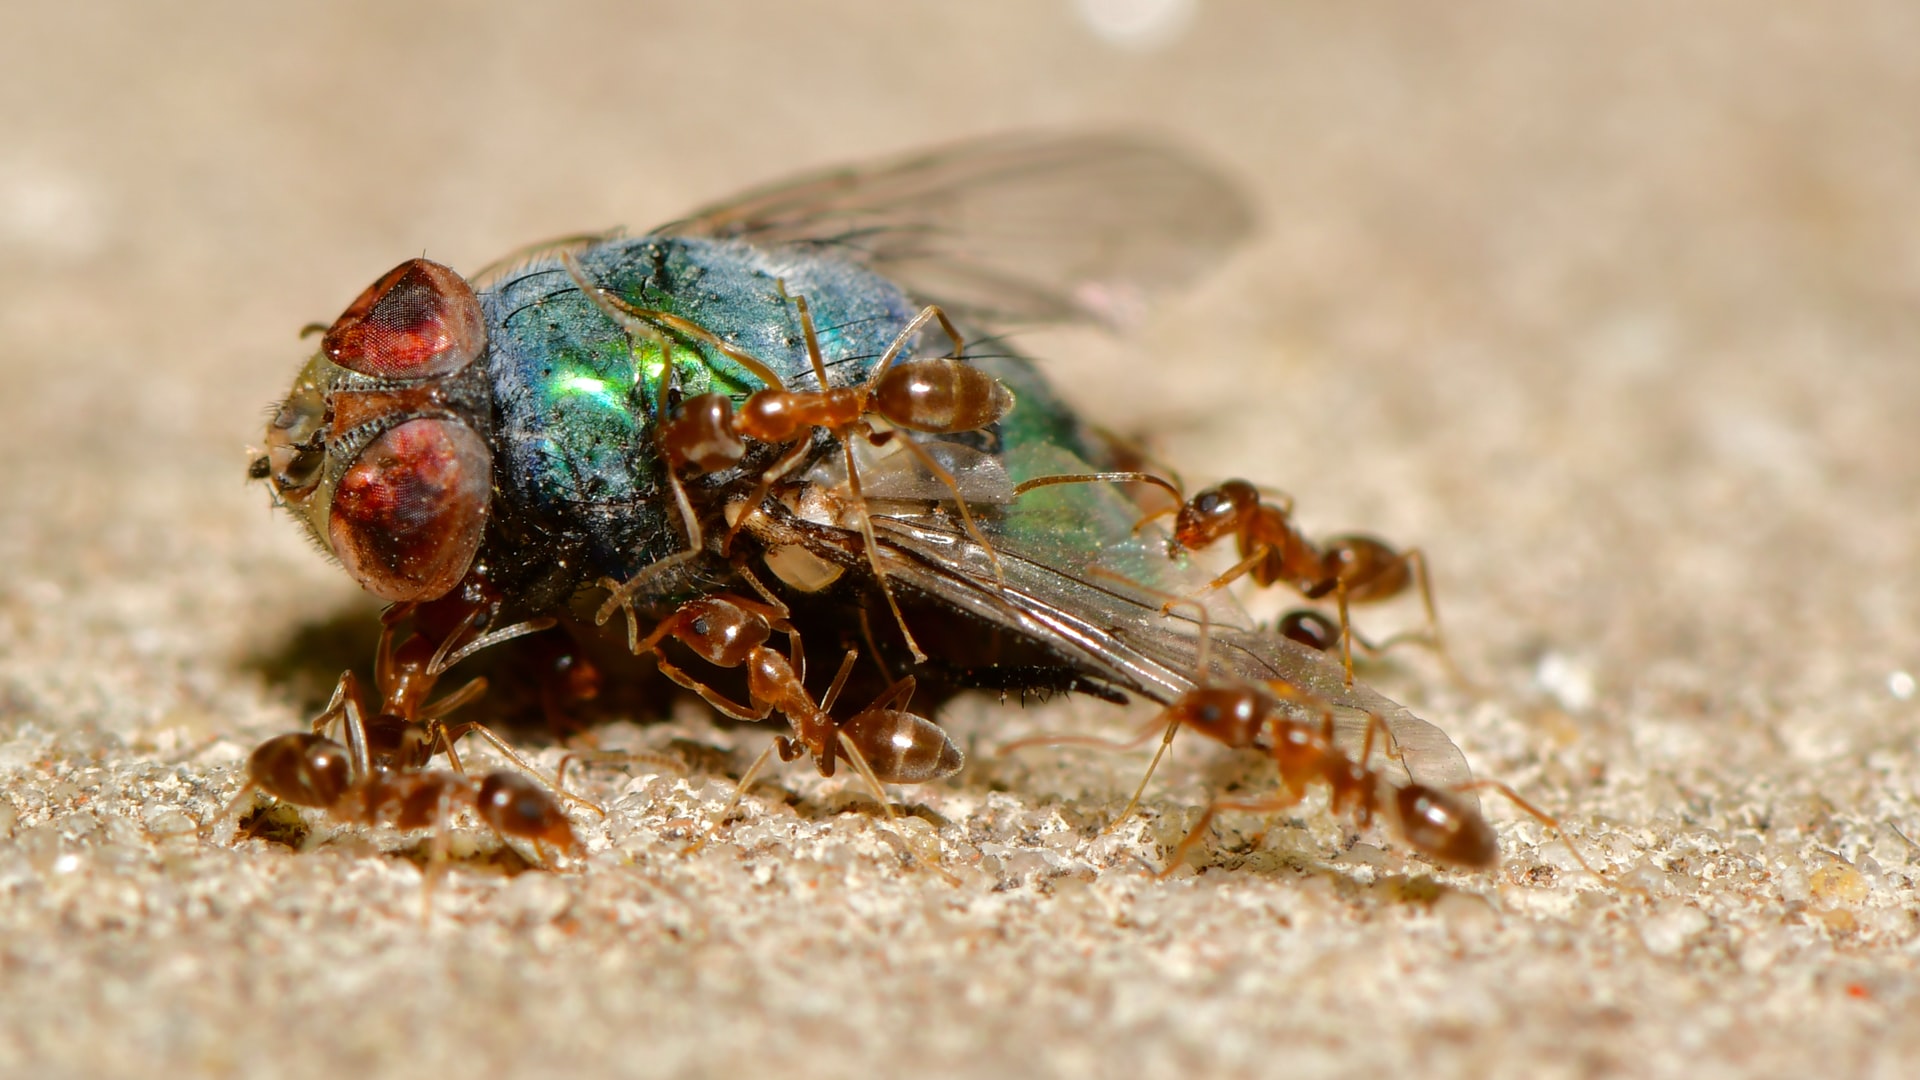 Image of ants debugging a fly. Photo by Juan Pablo Mascanfroni on Unsplash